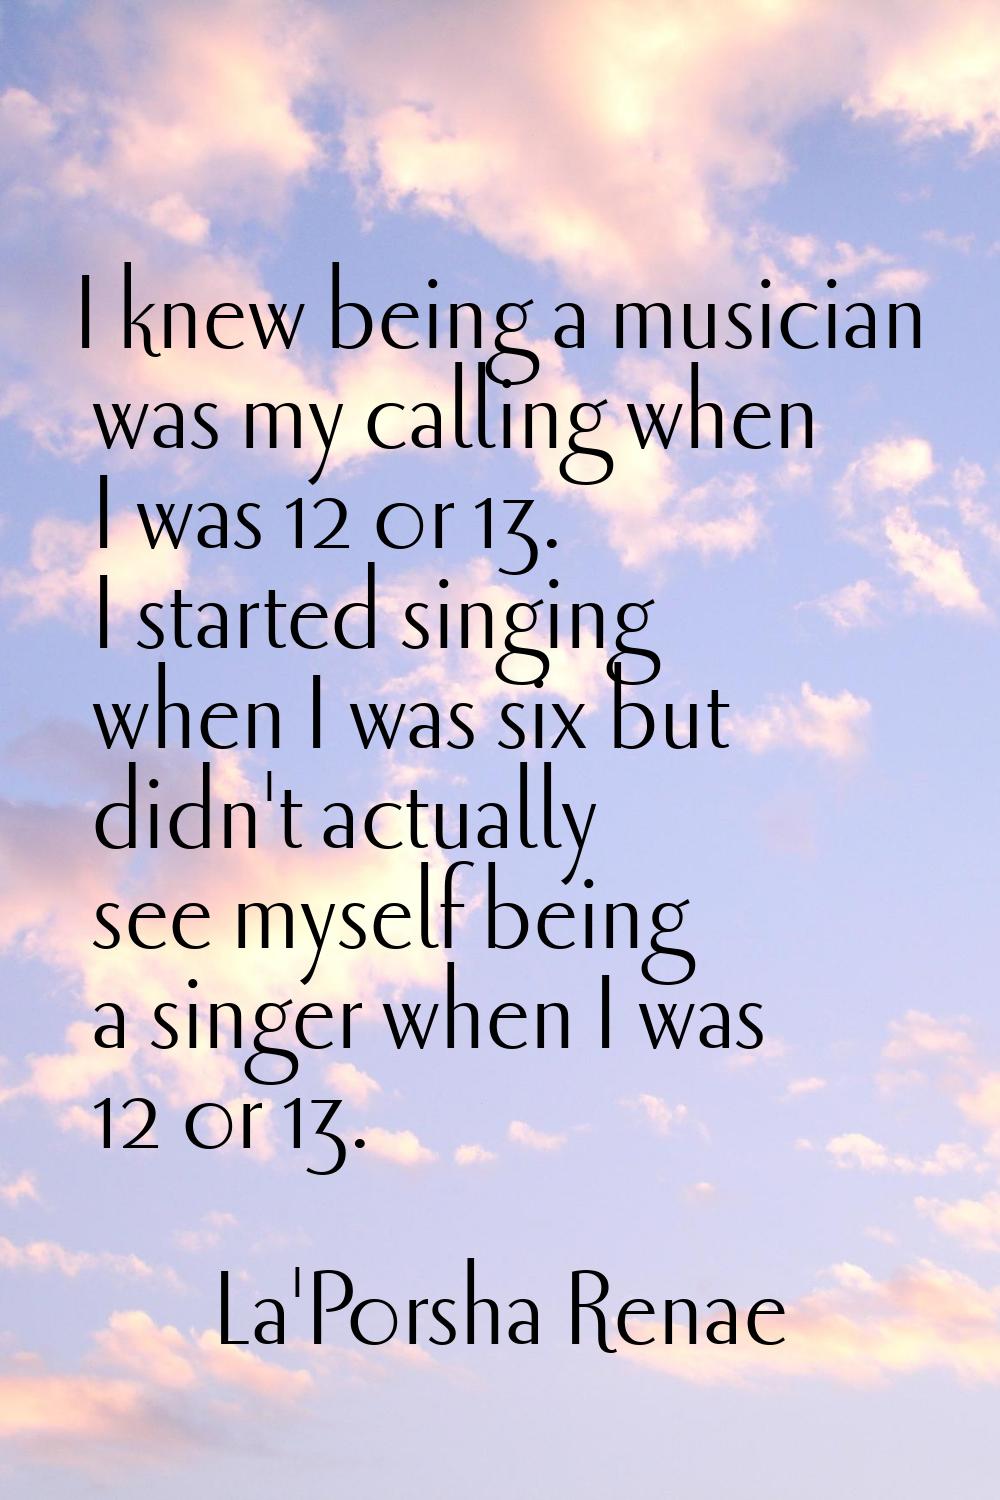 I knew being a musician was my calling when I was 12 or 13. I started singing when I was six but di